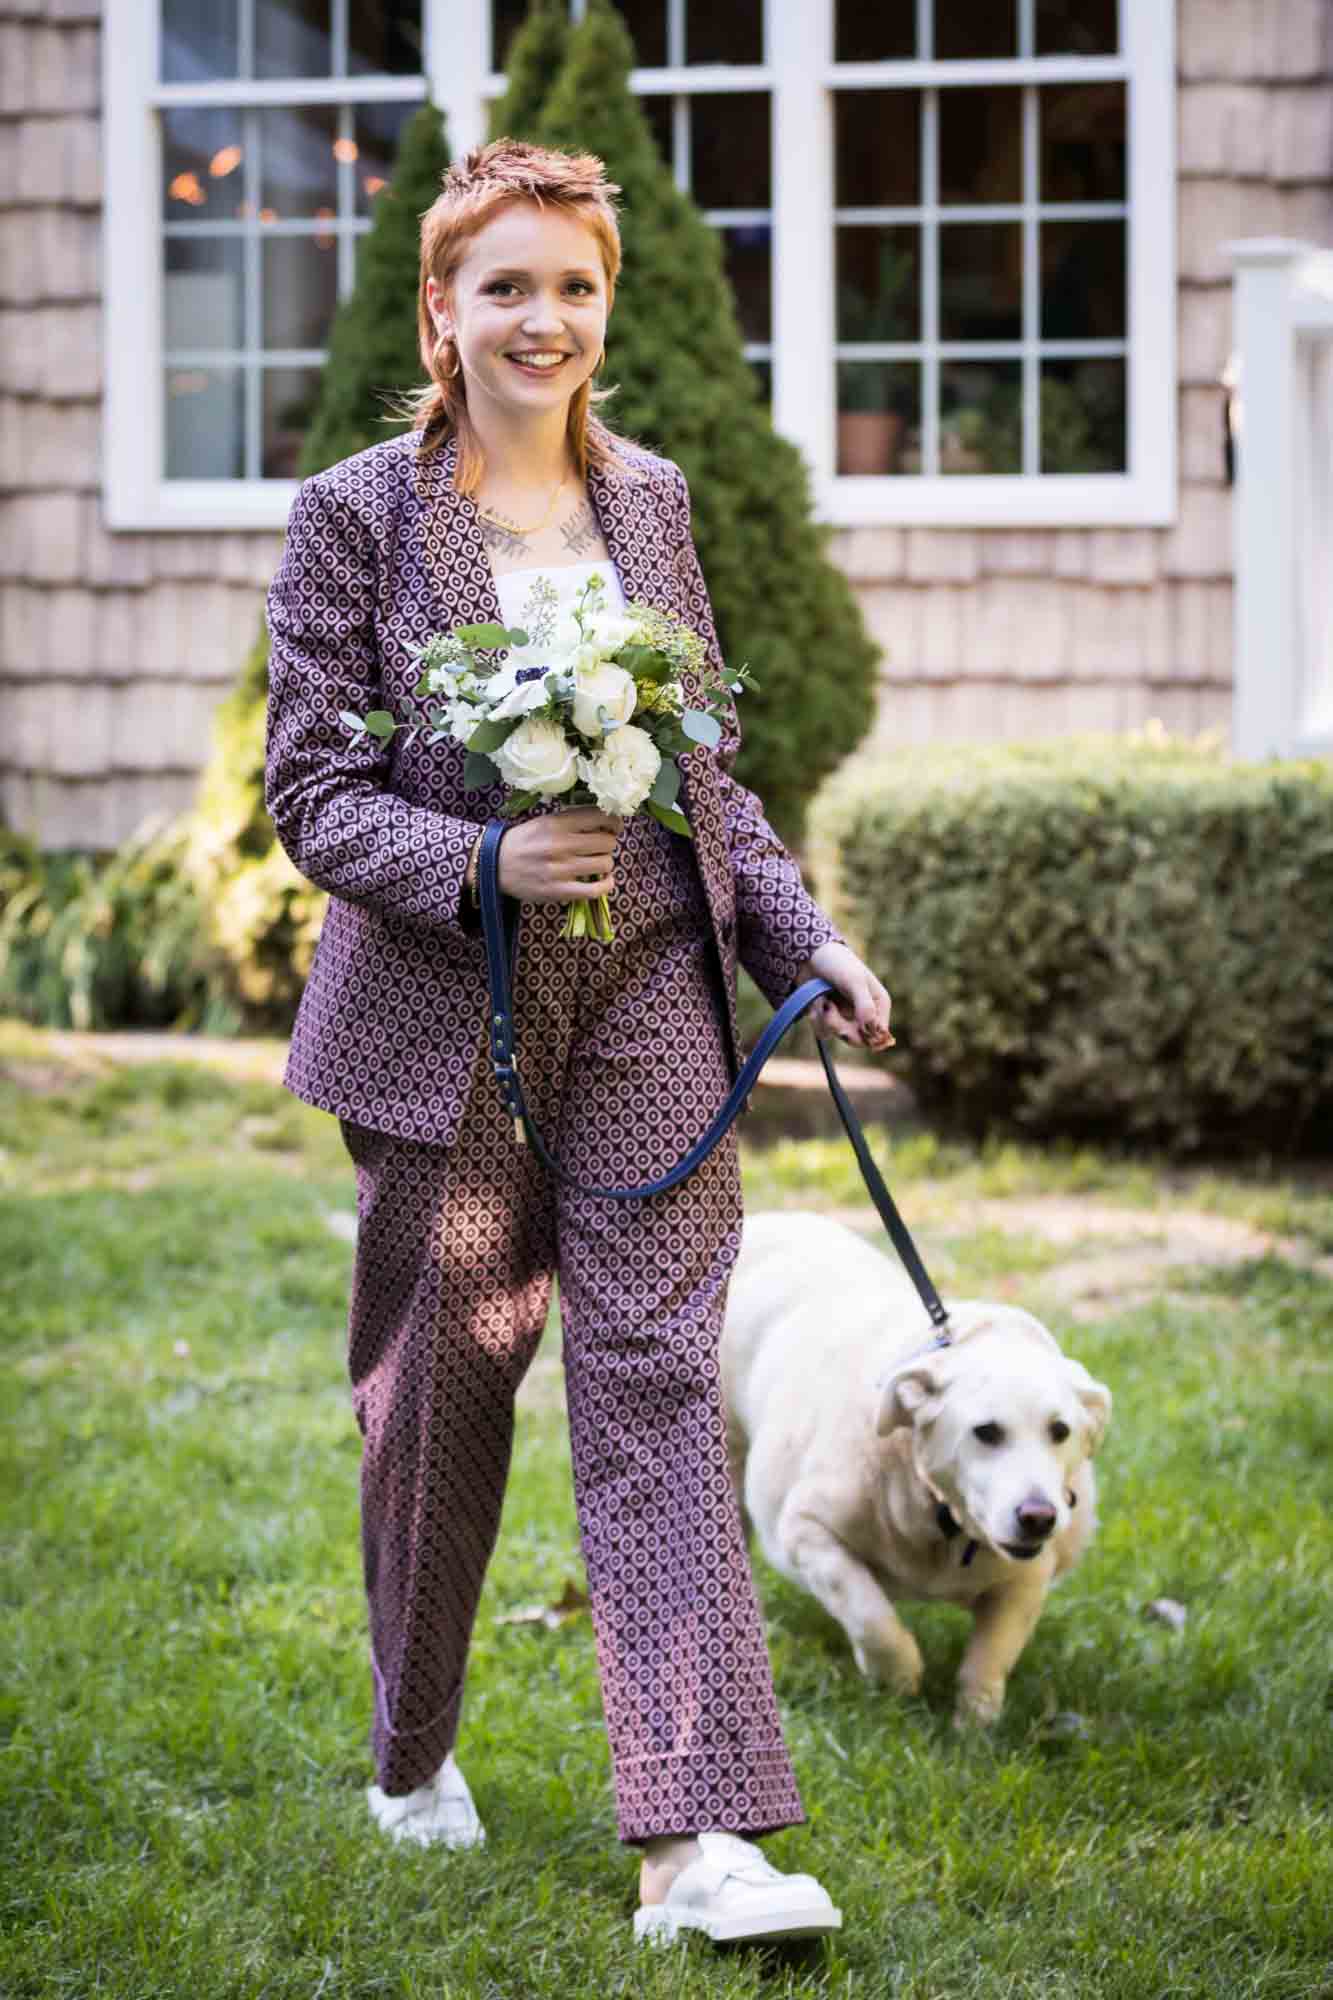 Woman wearing pink suit holding flowers and walking white dog on leash